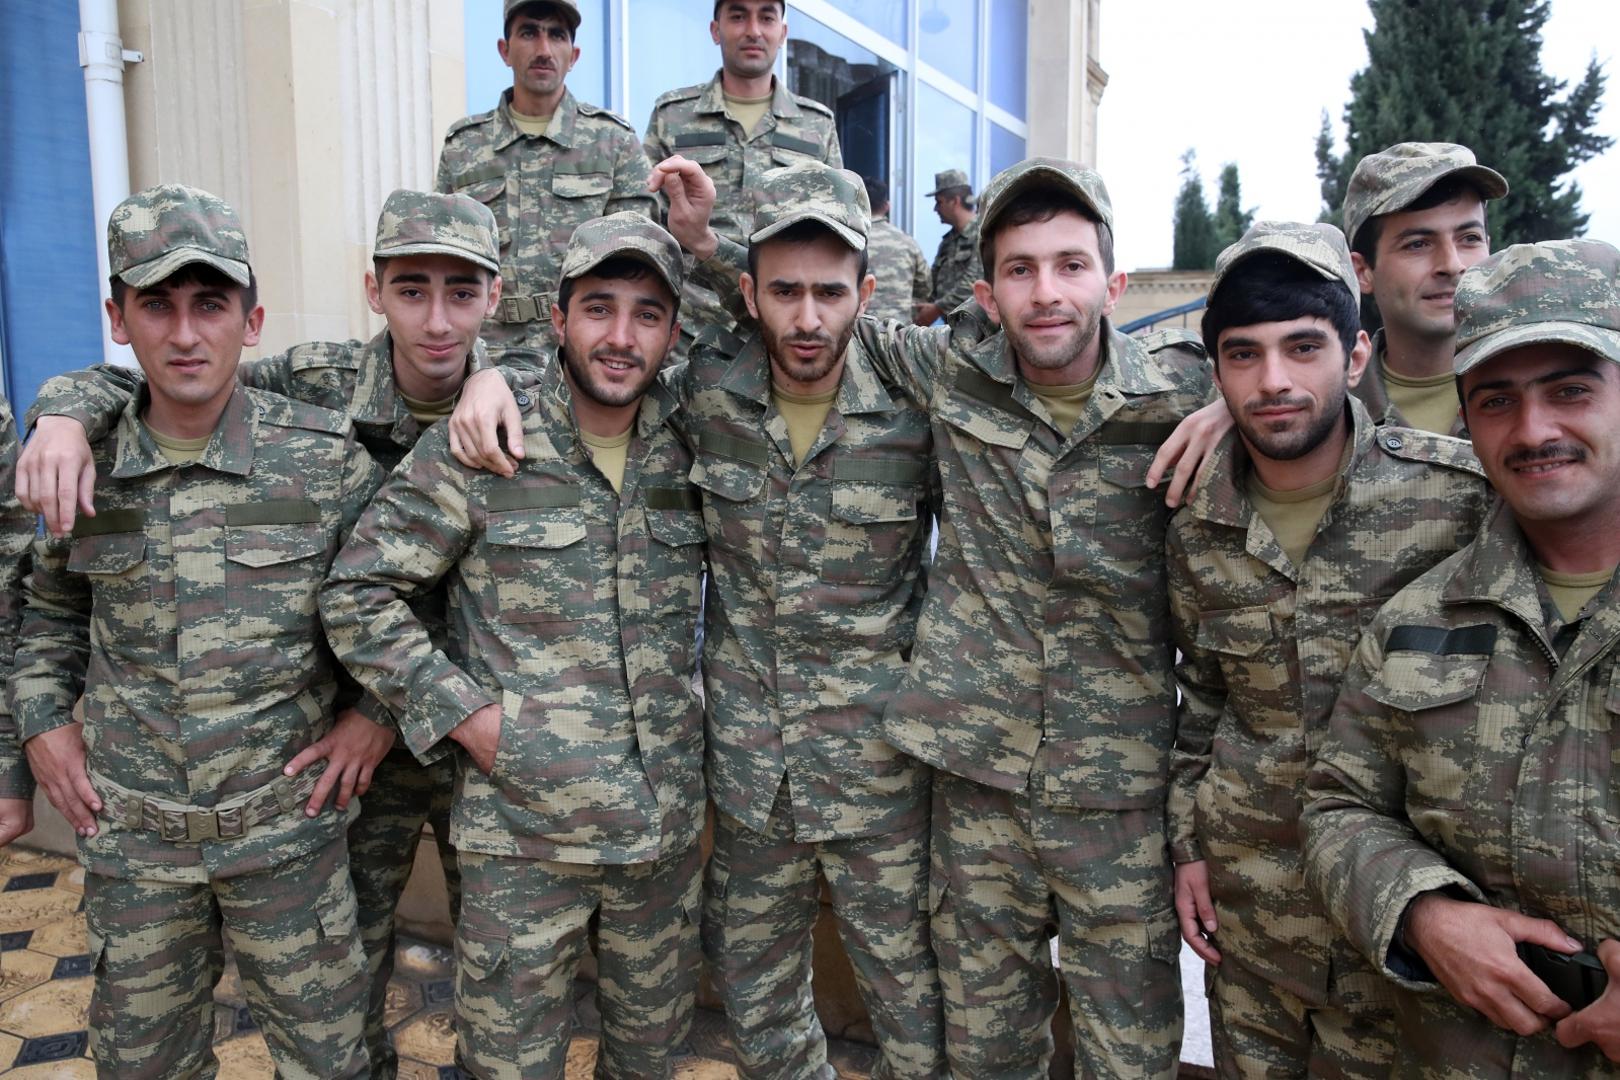 BARDA, AZERBAIJAN - OCTOBER 5, 2020: Azerbaijani servicemen pose for a photograph ahead of being deployed to the front line. The situation in Nagorno-Karabakh escalated on September 27, 2020, with reports from Yerevan on the Azerbaijani troops advancing in the direction of Nagorno-Karabakh and shelling its settlements, including the capital city of Stepanakert. Both Azerbaijan and Armenia have declared martial law and military mobilization, reporting on casualties and injuries among civilians as well. Valery Sharifulin/TASS Photo via Newscom Newscom/PIXSELL